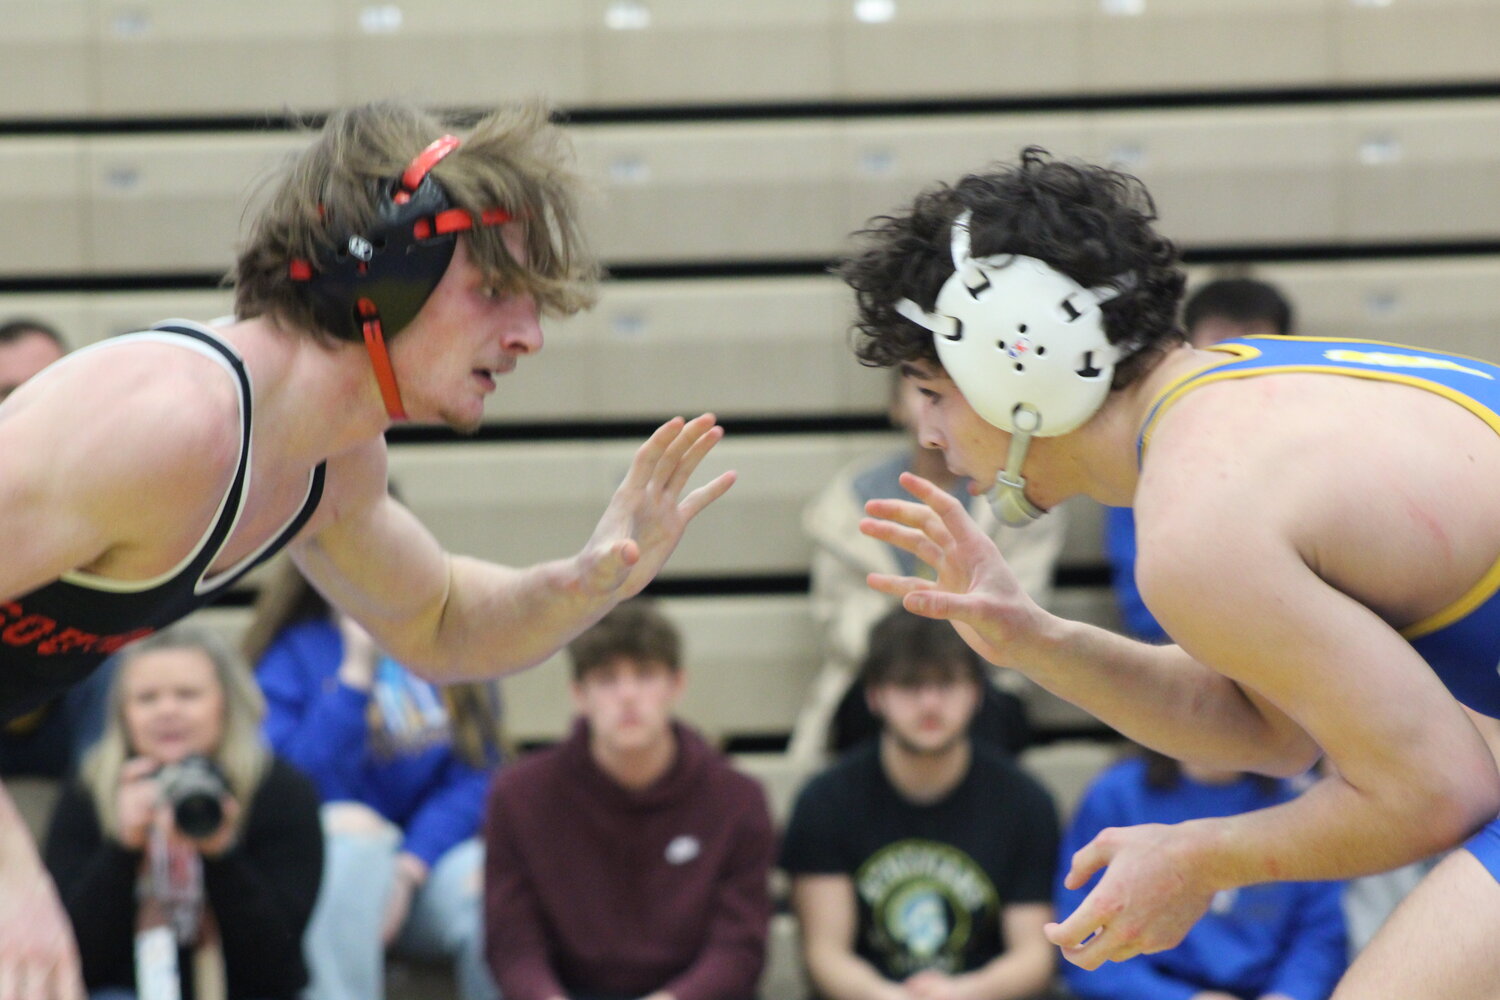 Southmont's Maddox Cade and Crawfordsville's Landon Vaught squared off for the third time this season with Cade coming out on top for his 4th sectional title of his career.